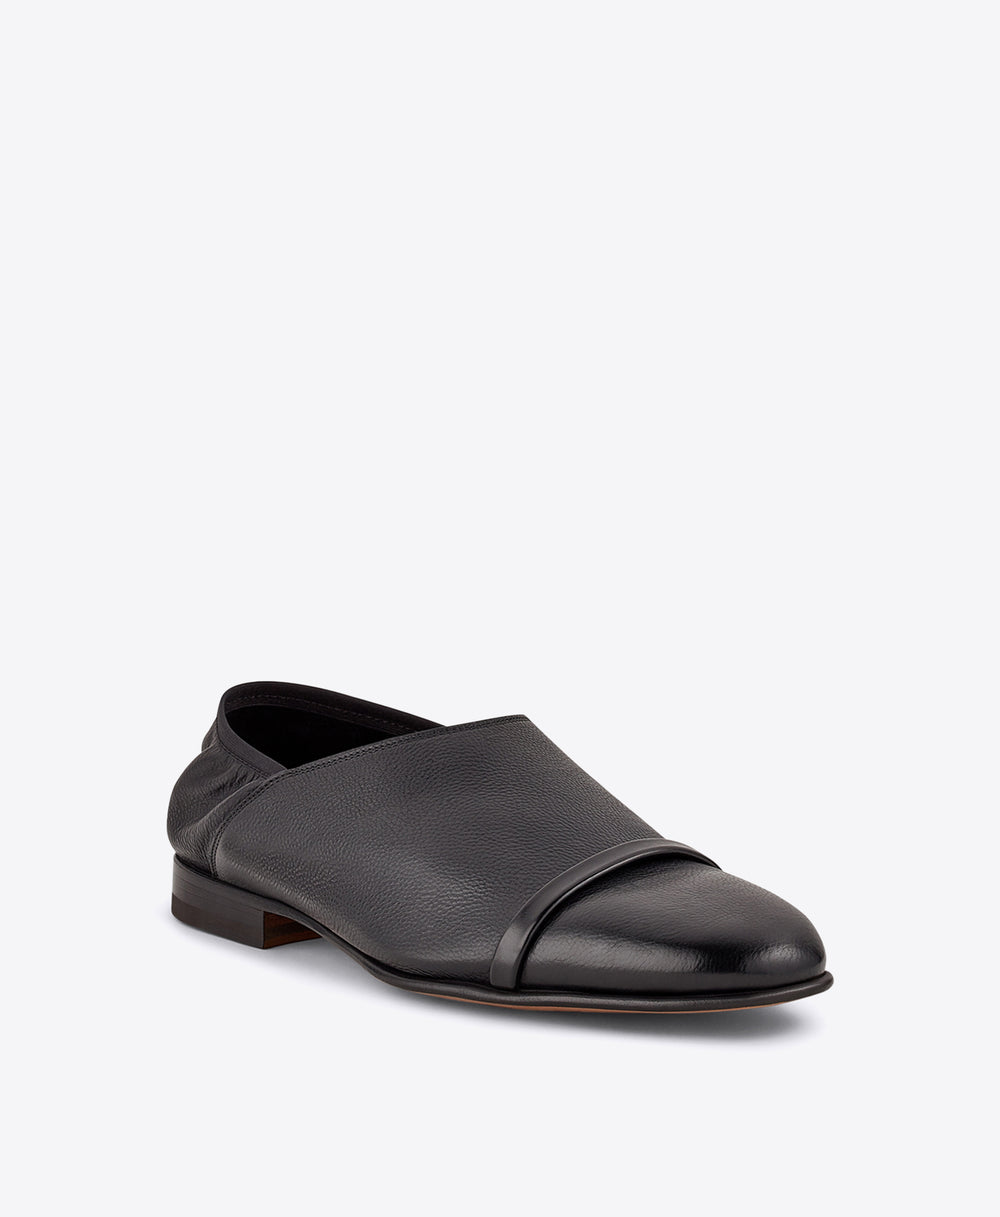 Men's Black Grained Calf Leather Mules Malone Souliers